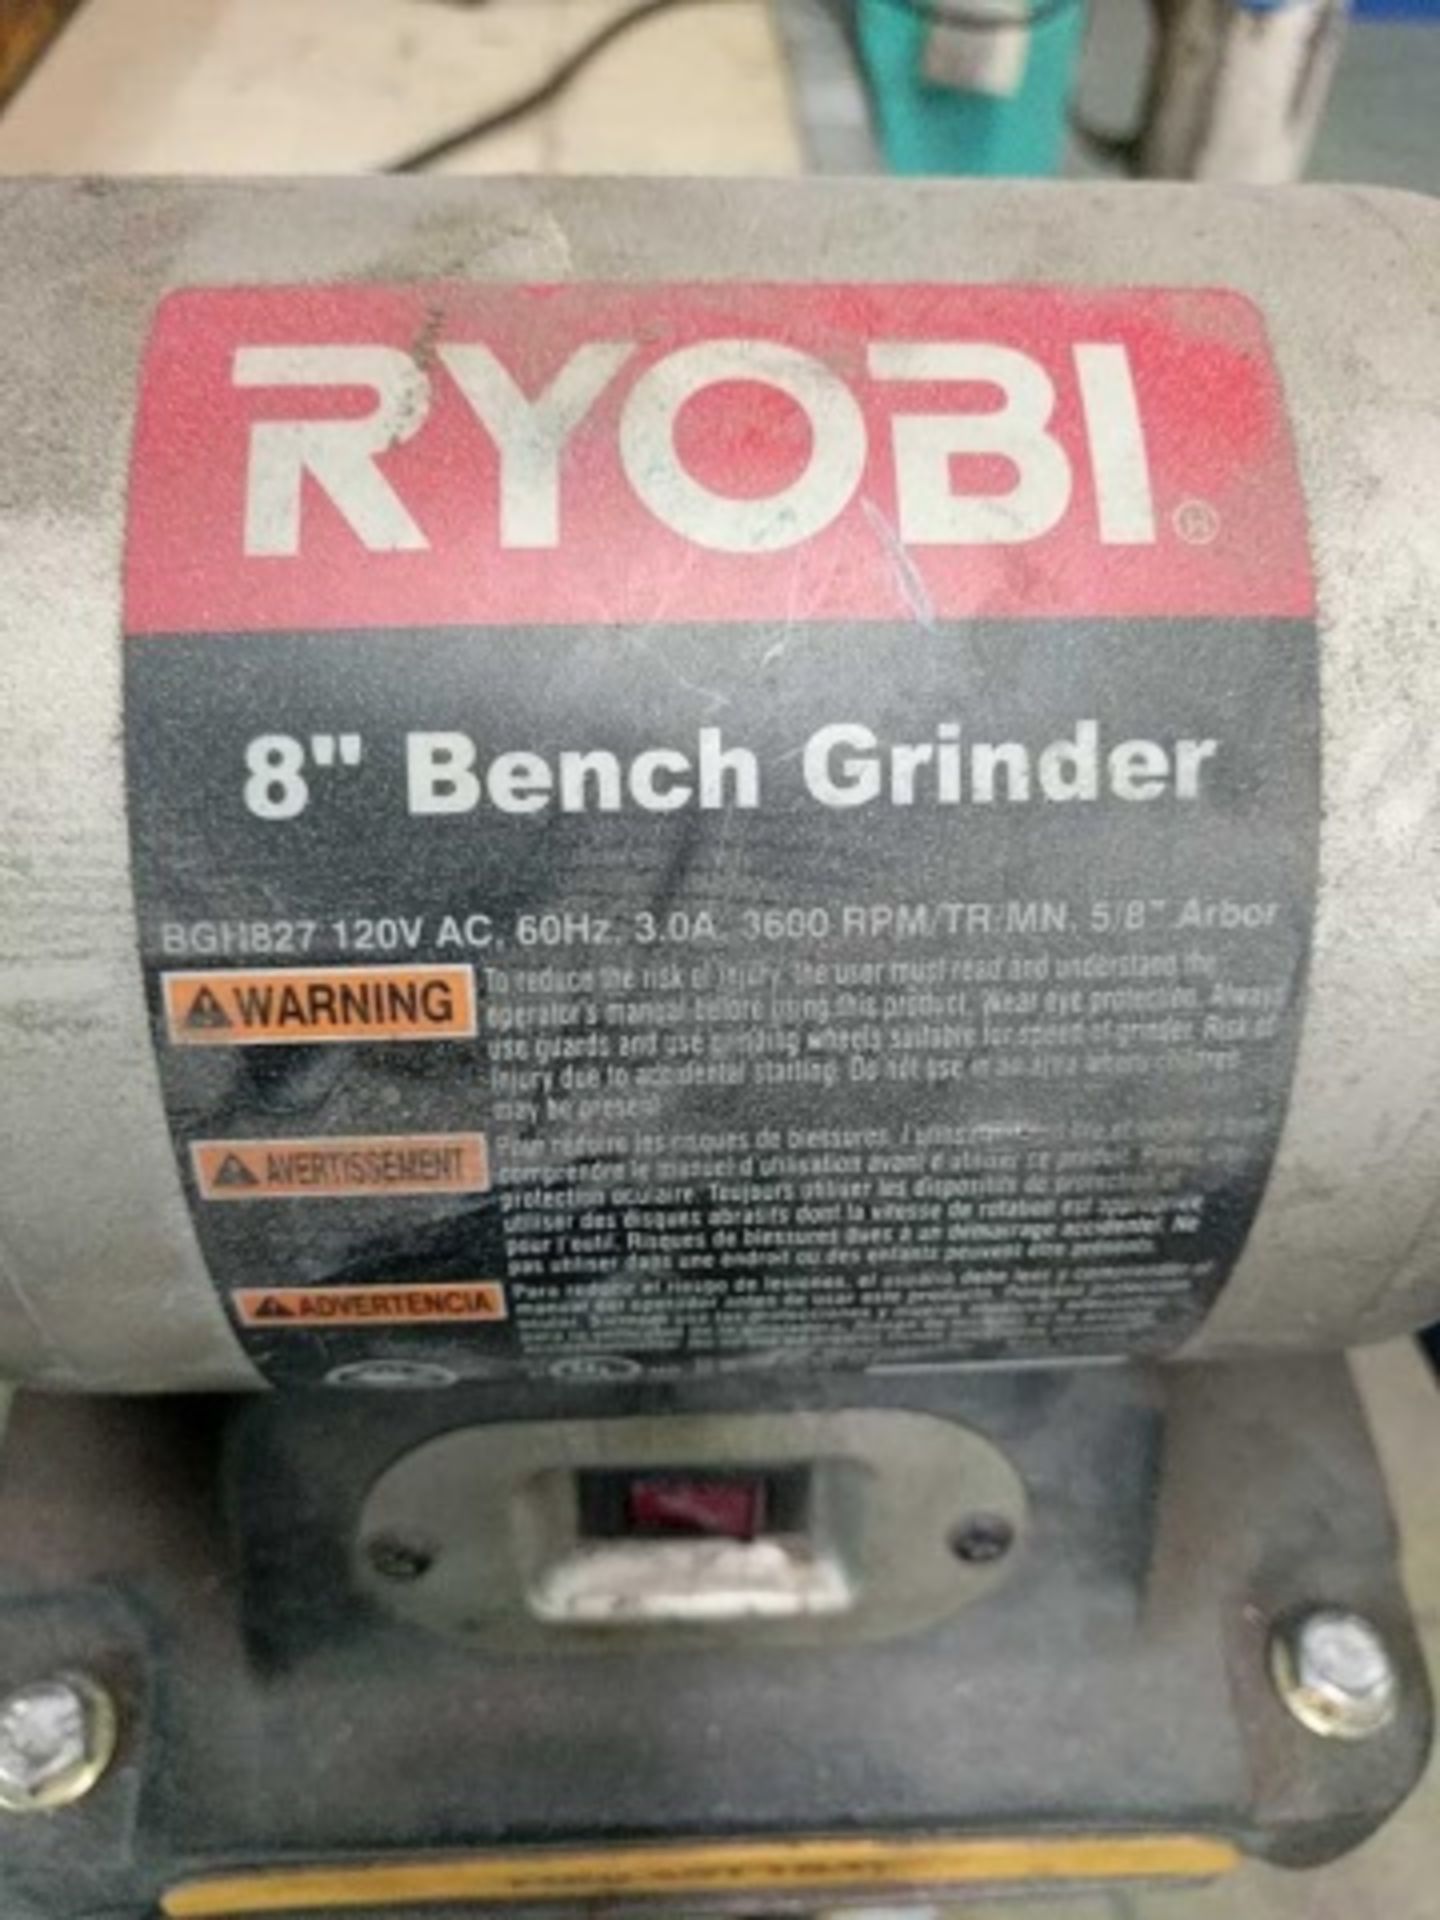 Ryobi 8" Double End Bench Grinder - Image 2 of 4